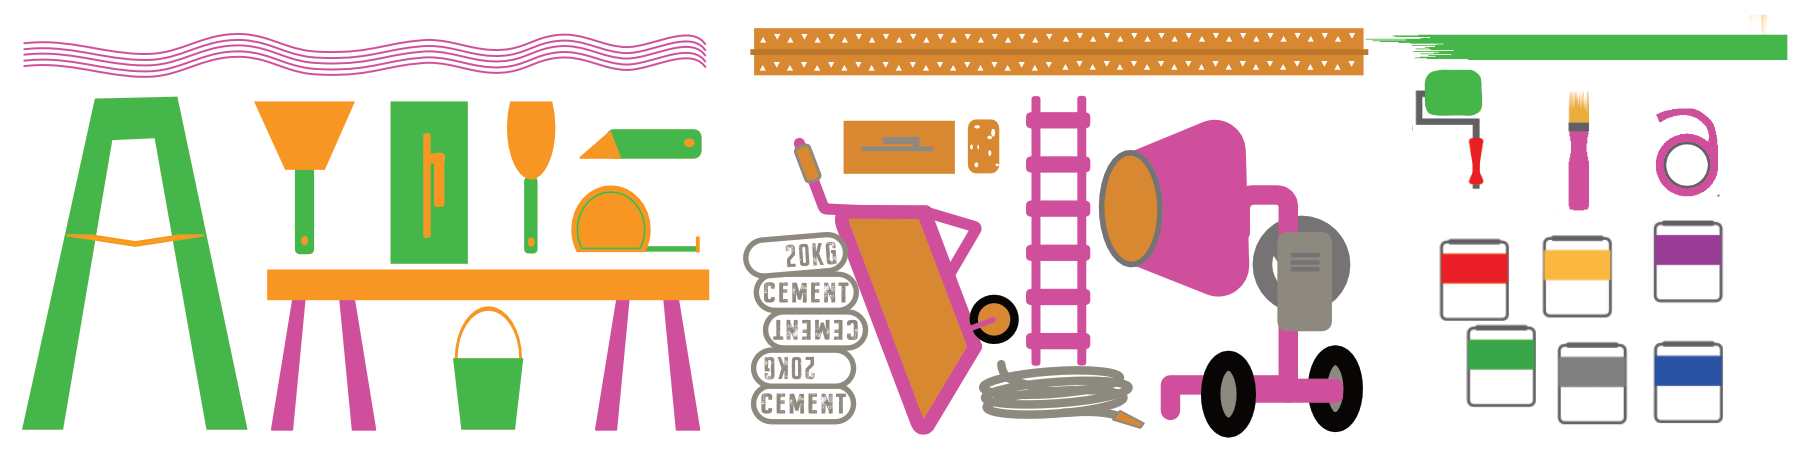 A Haluna Happy Names fun composite graphic in pink green and orange on white showing elements for home improvement